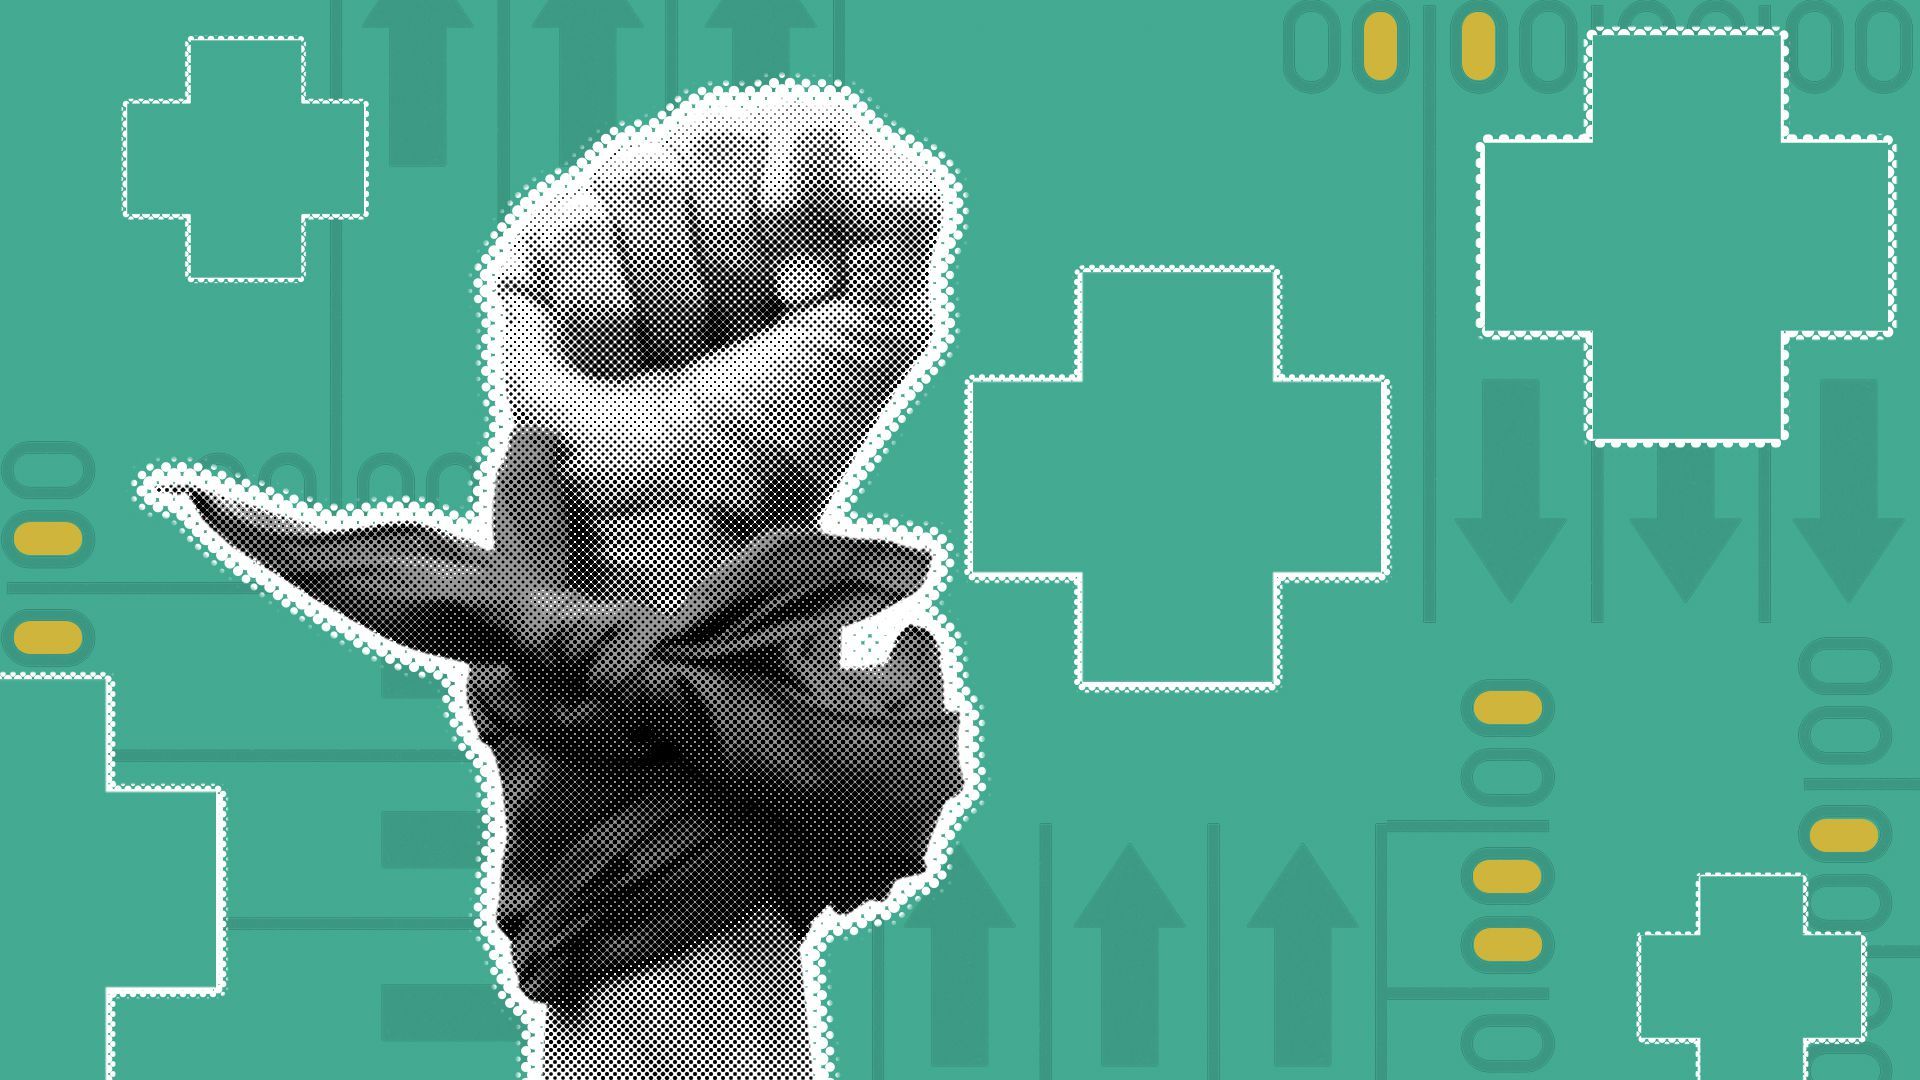 Photo illustration of a fist in the air surrounded by medical crosses and ballot designs